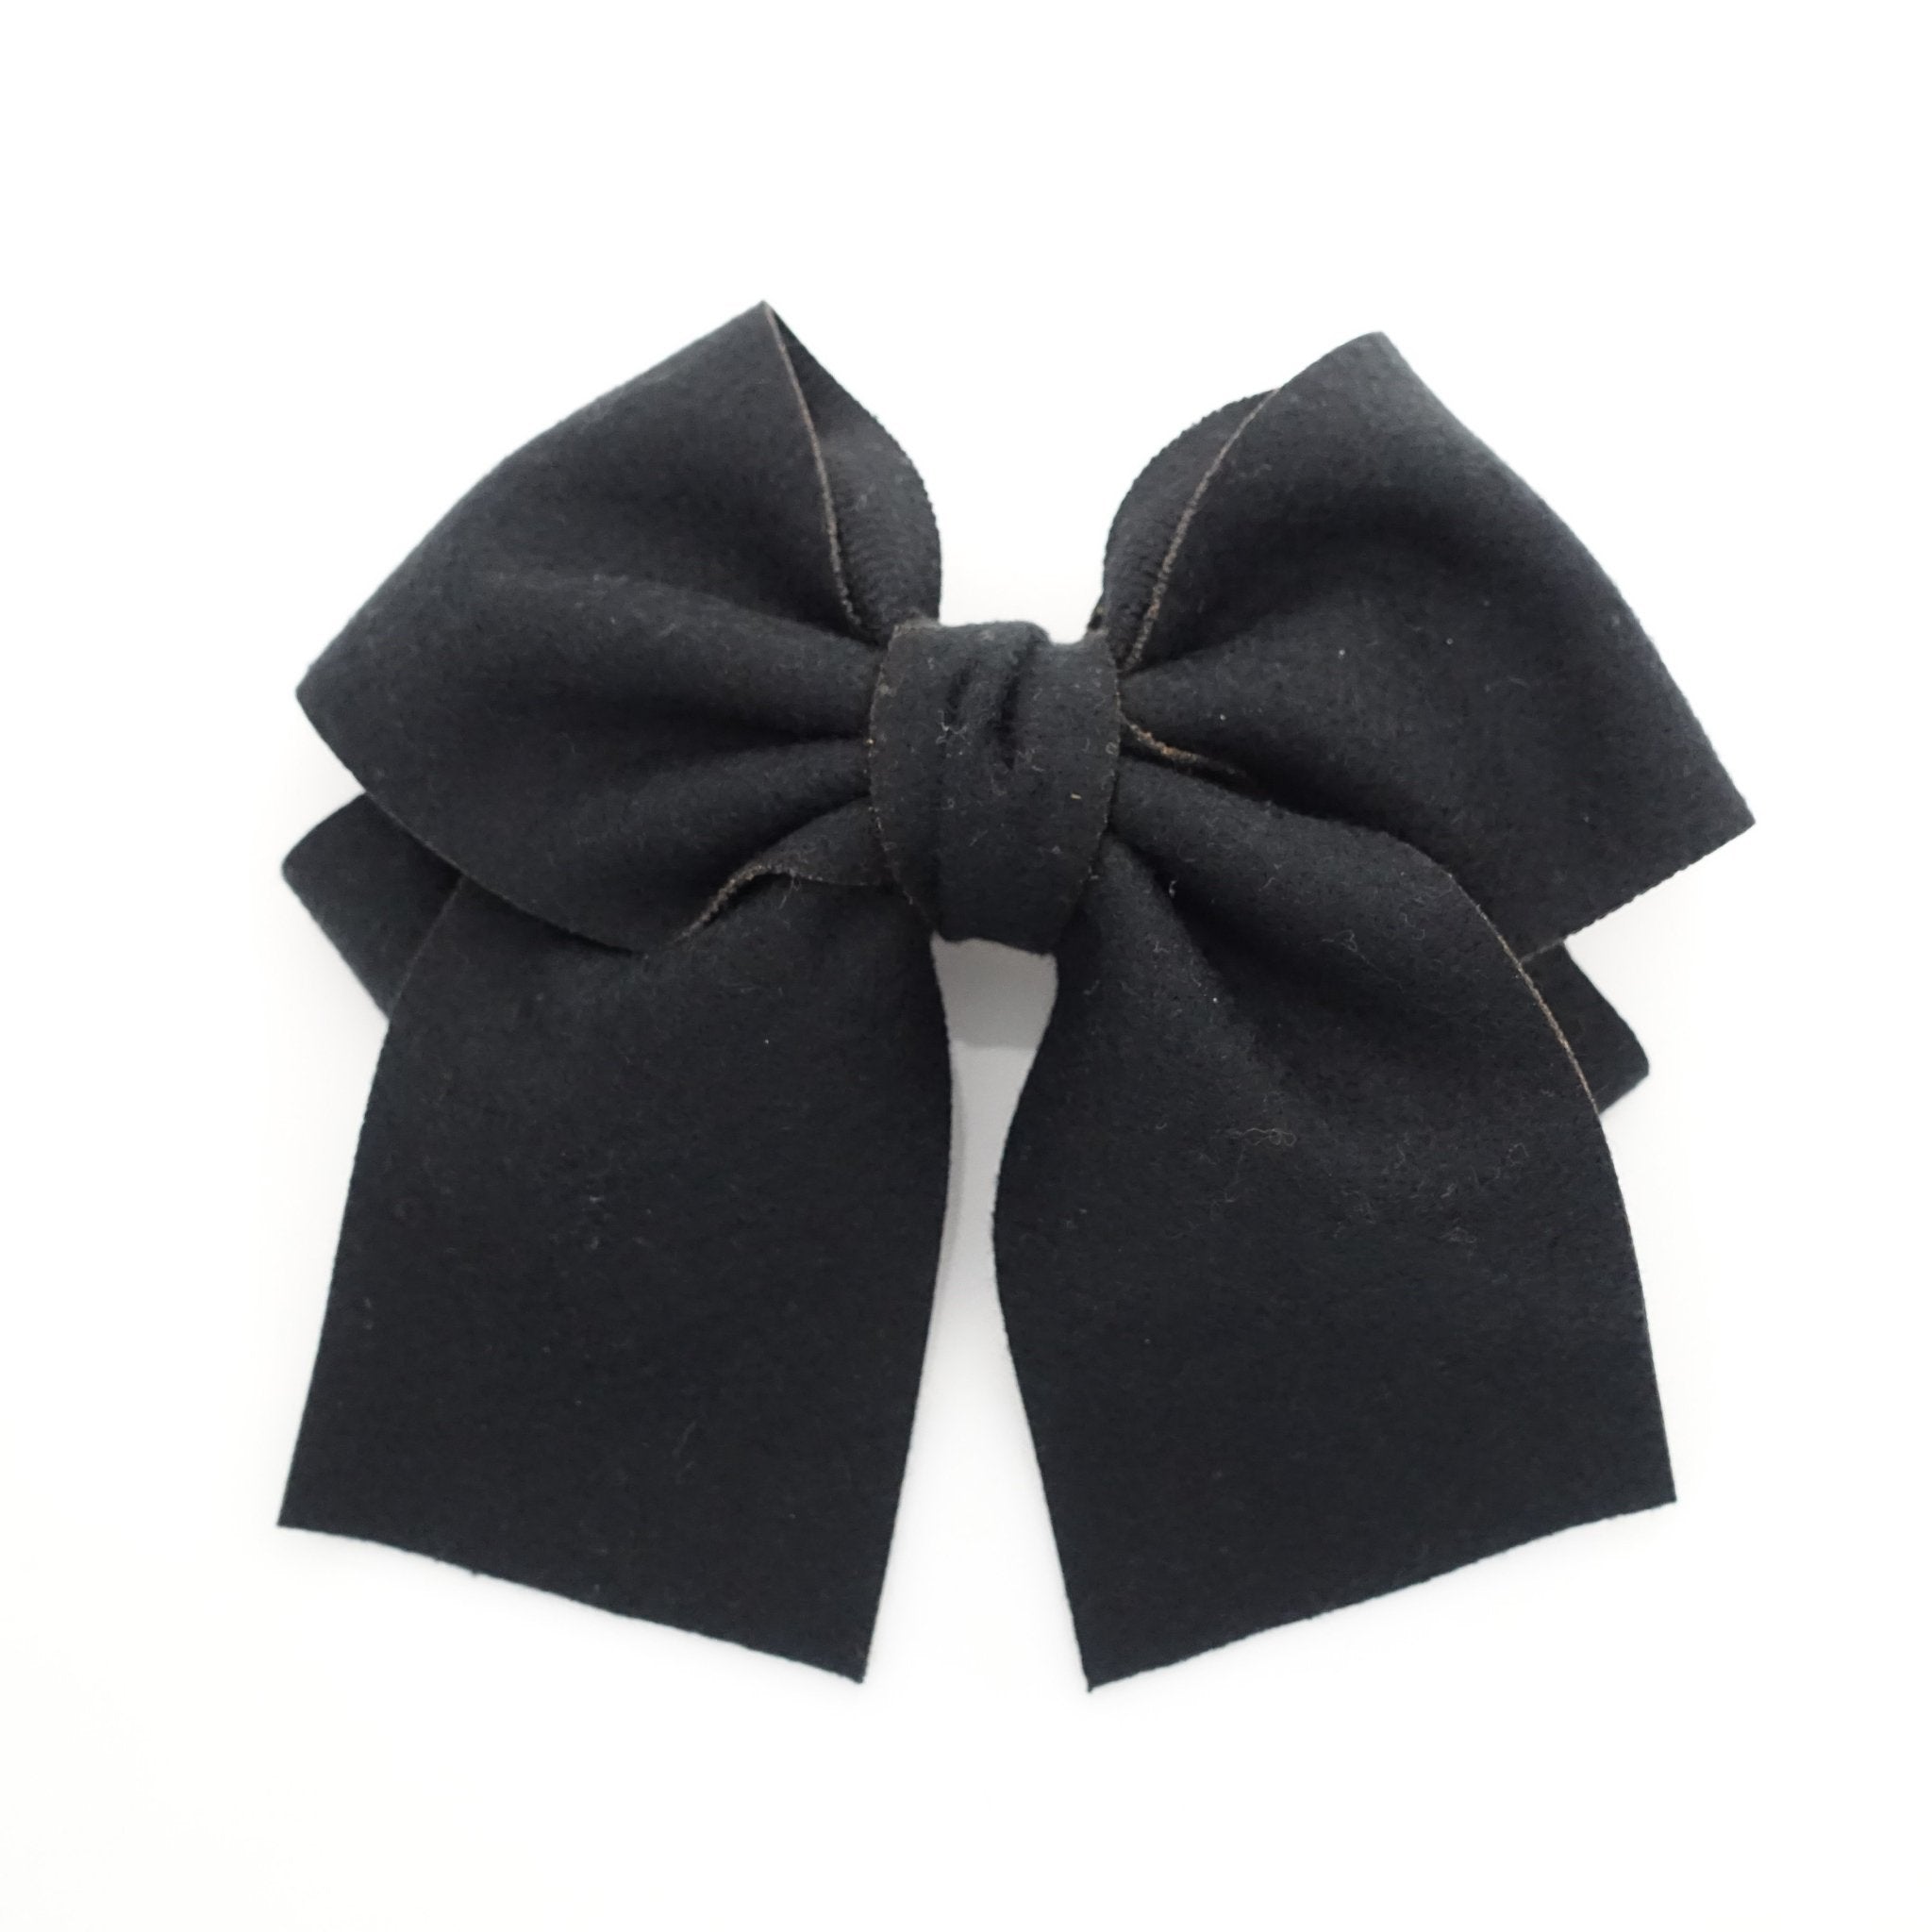 veryshine.com claw/banana/barrette Black woolen layered bow V style tail hair bow french barrette for women